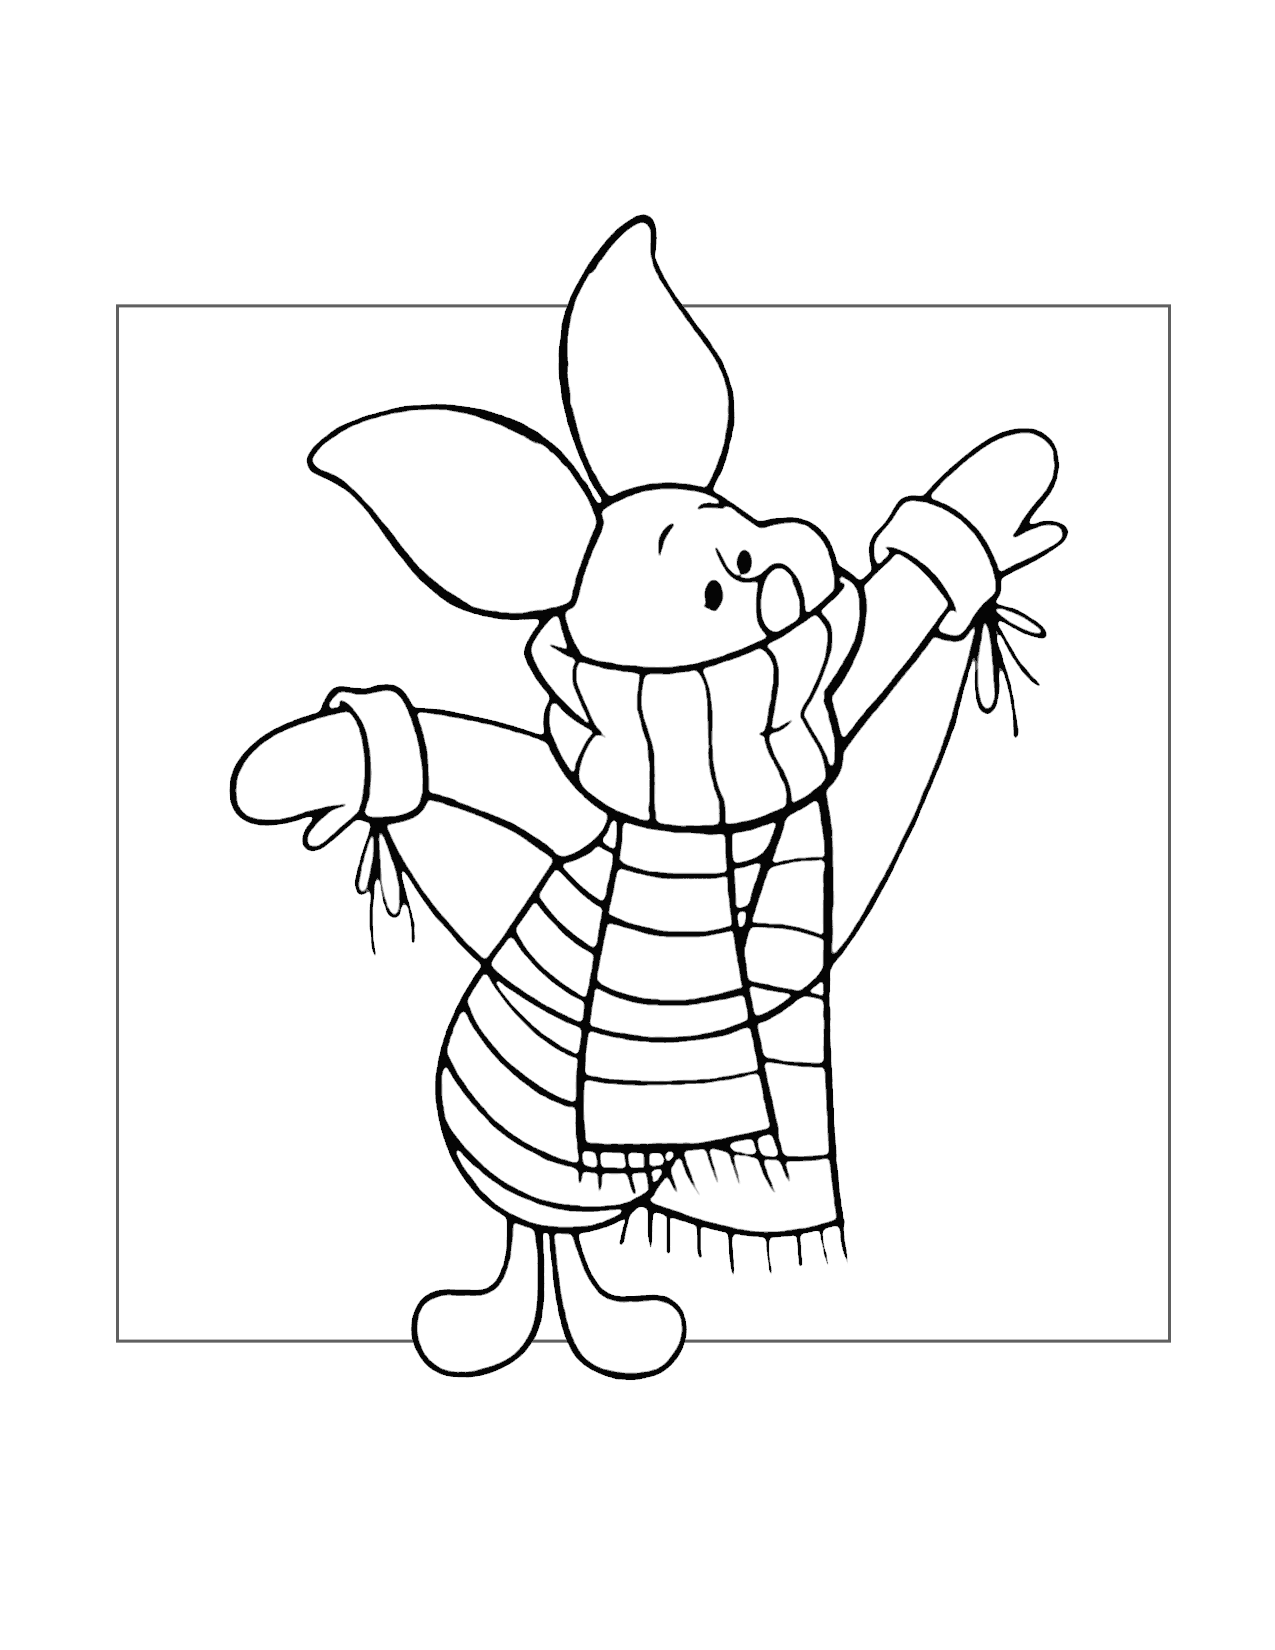 Winter Piglet Coloring Page